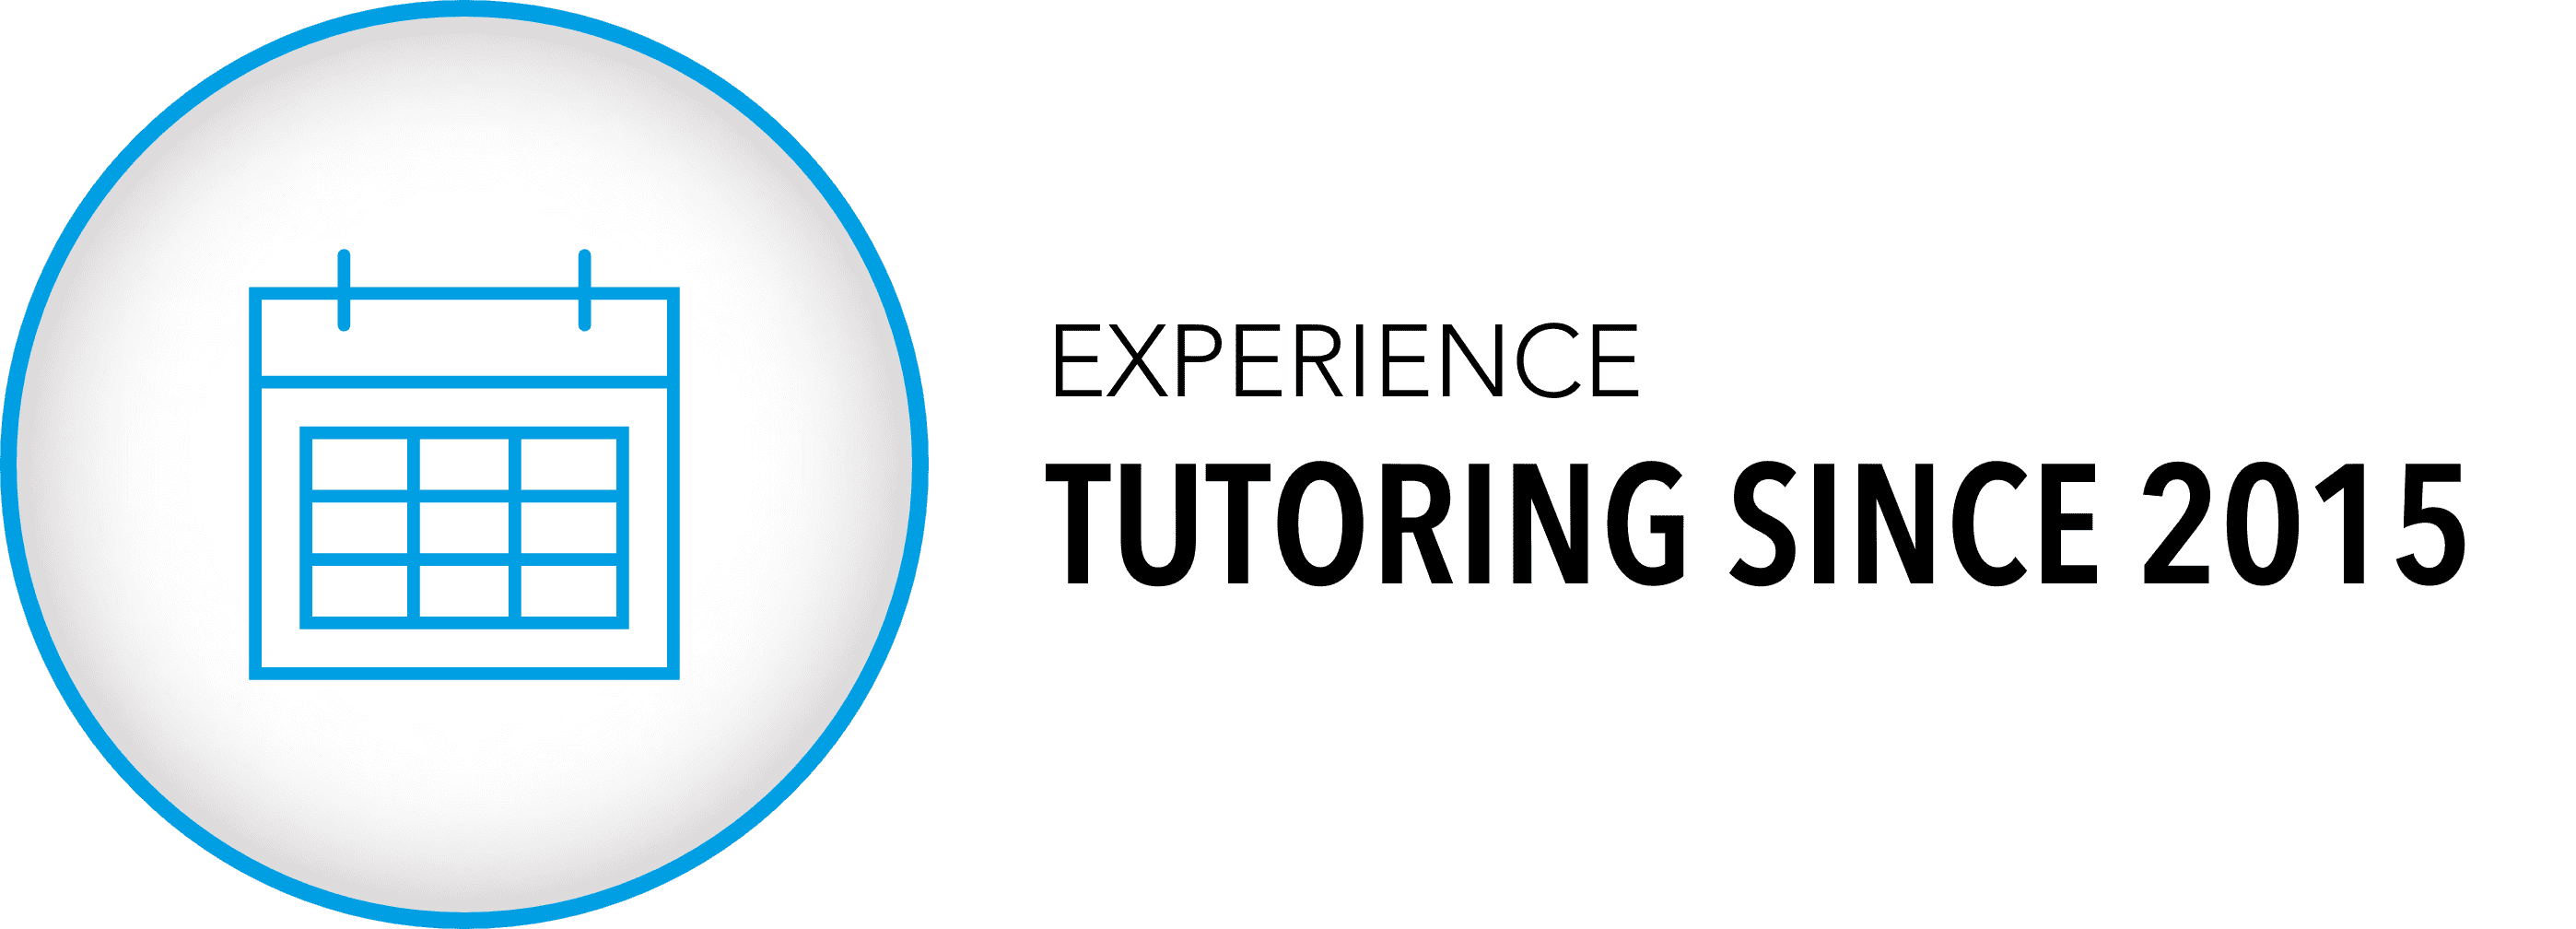 The Friendly Tutors is one of the nation's leading online tutoring companies